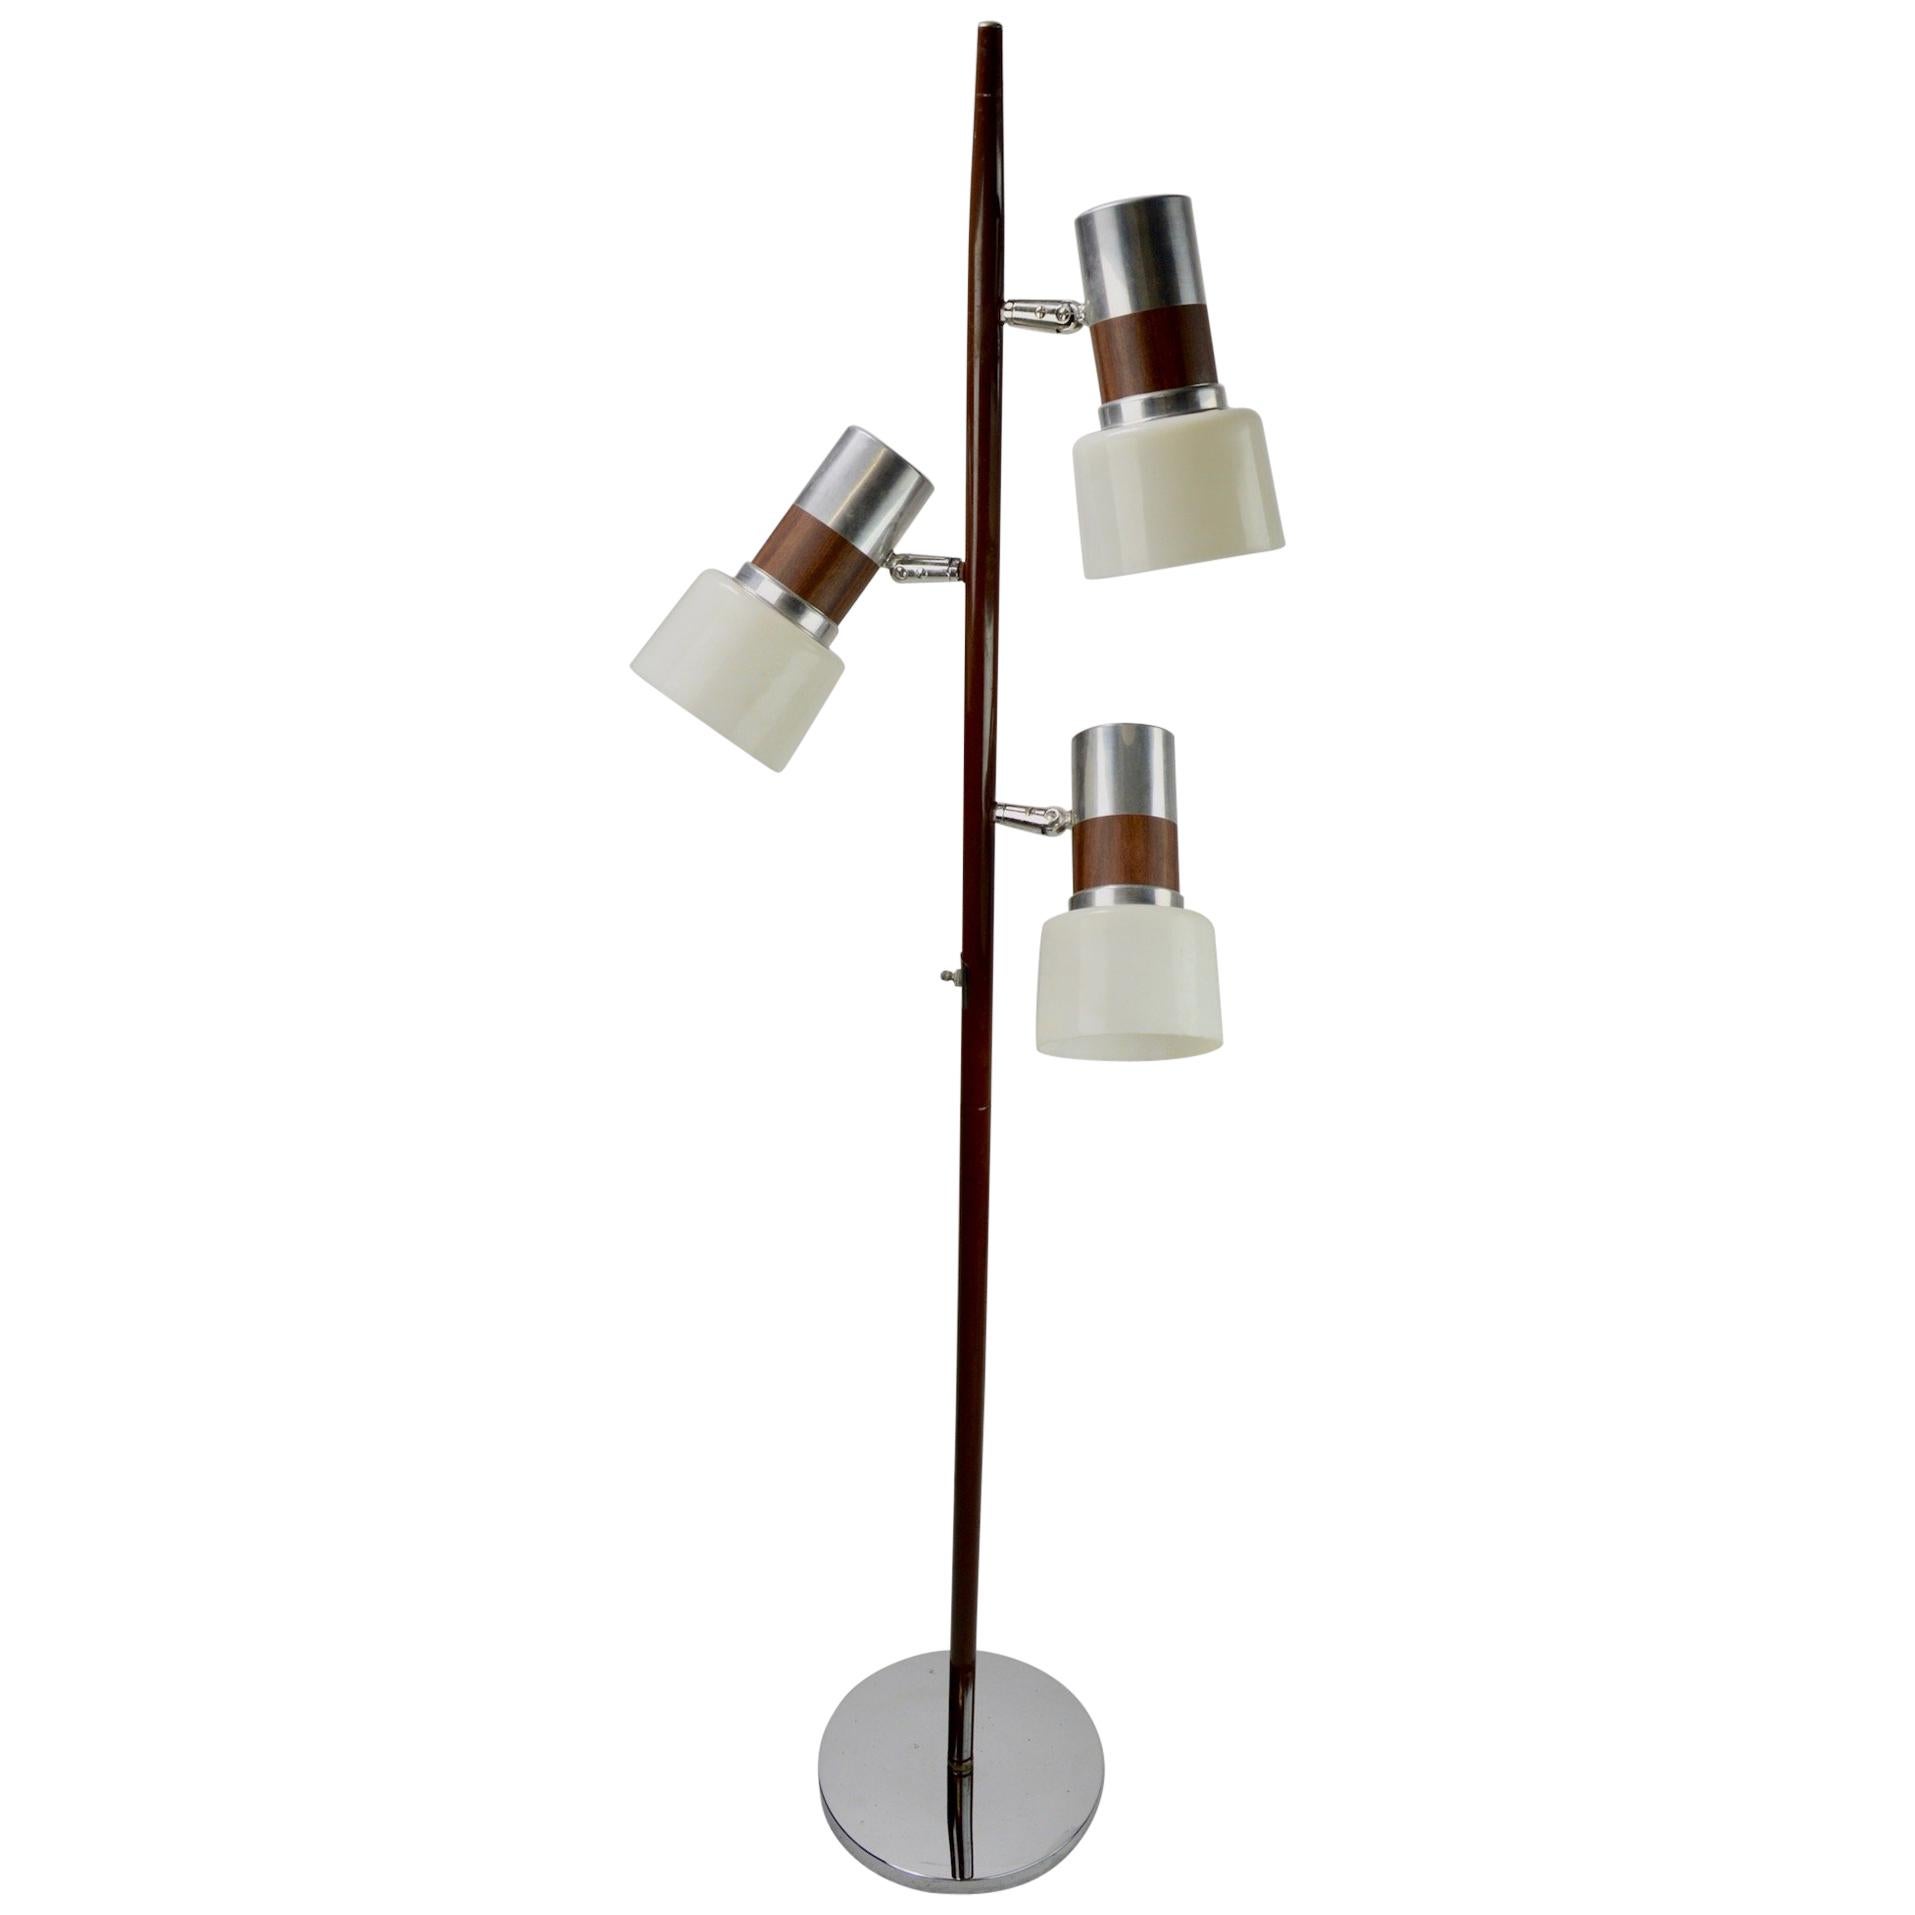 3-Light Mid Century Floor Lamp with Adjustable Shades Attributed to Thurston